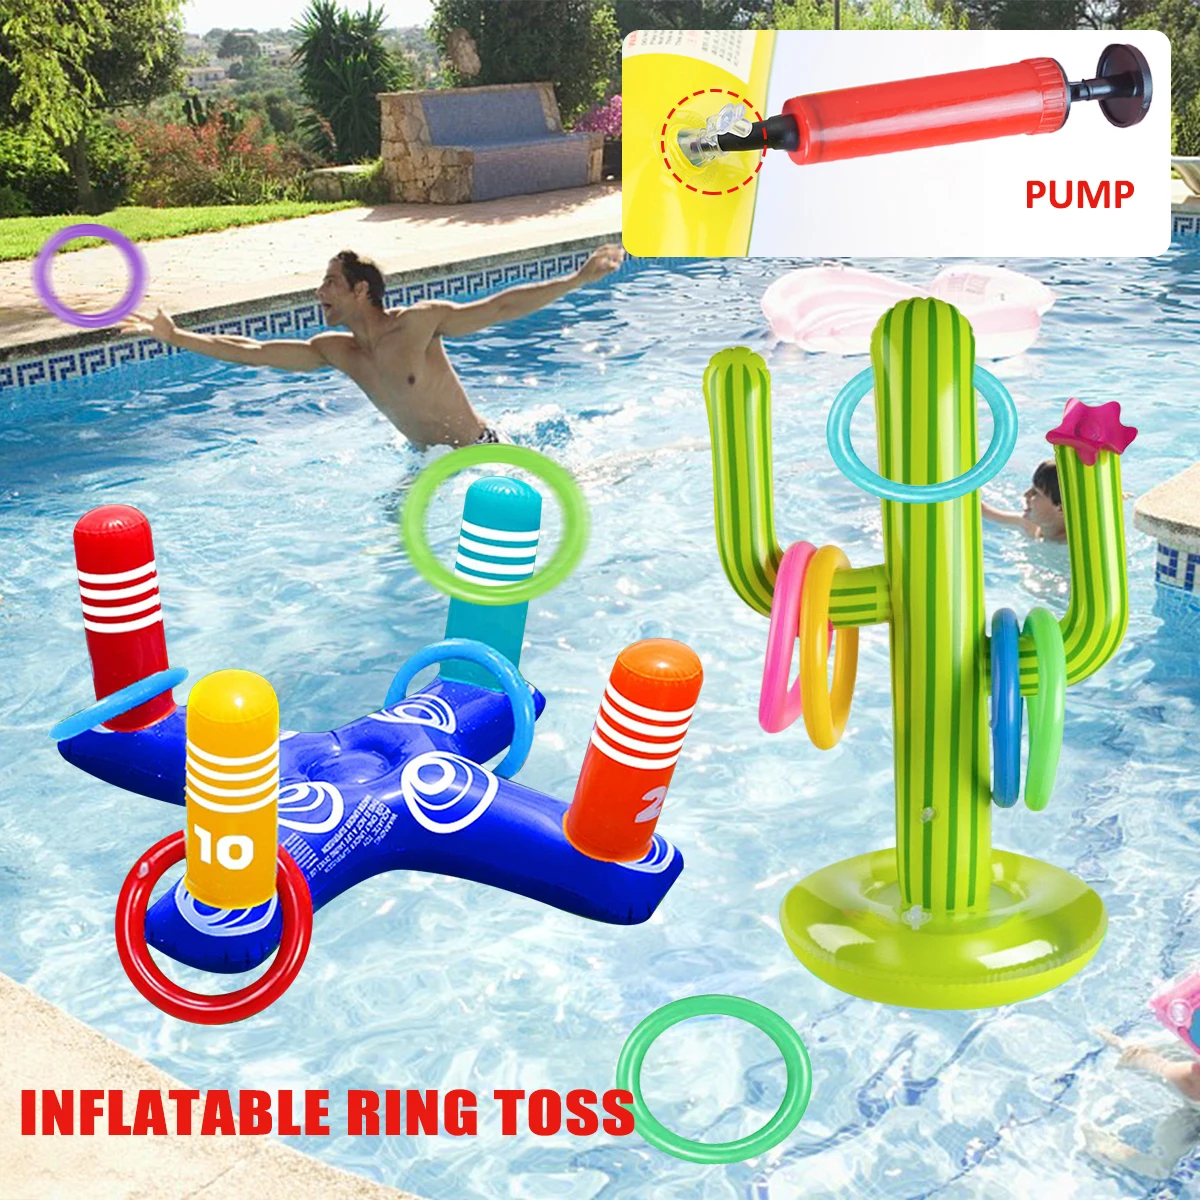 Inflatable Cactus Ring Throwing Pool Toy Game Set Summer Outdoor Pool Beach - £11.08 GBP